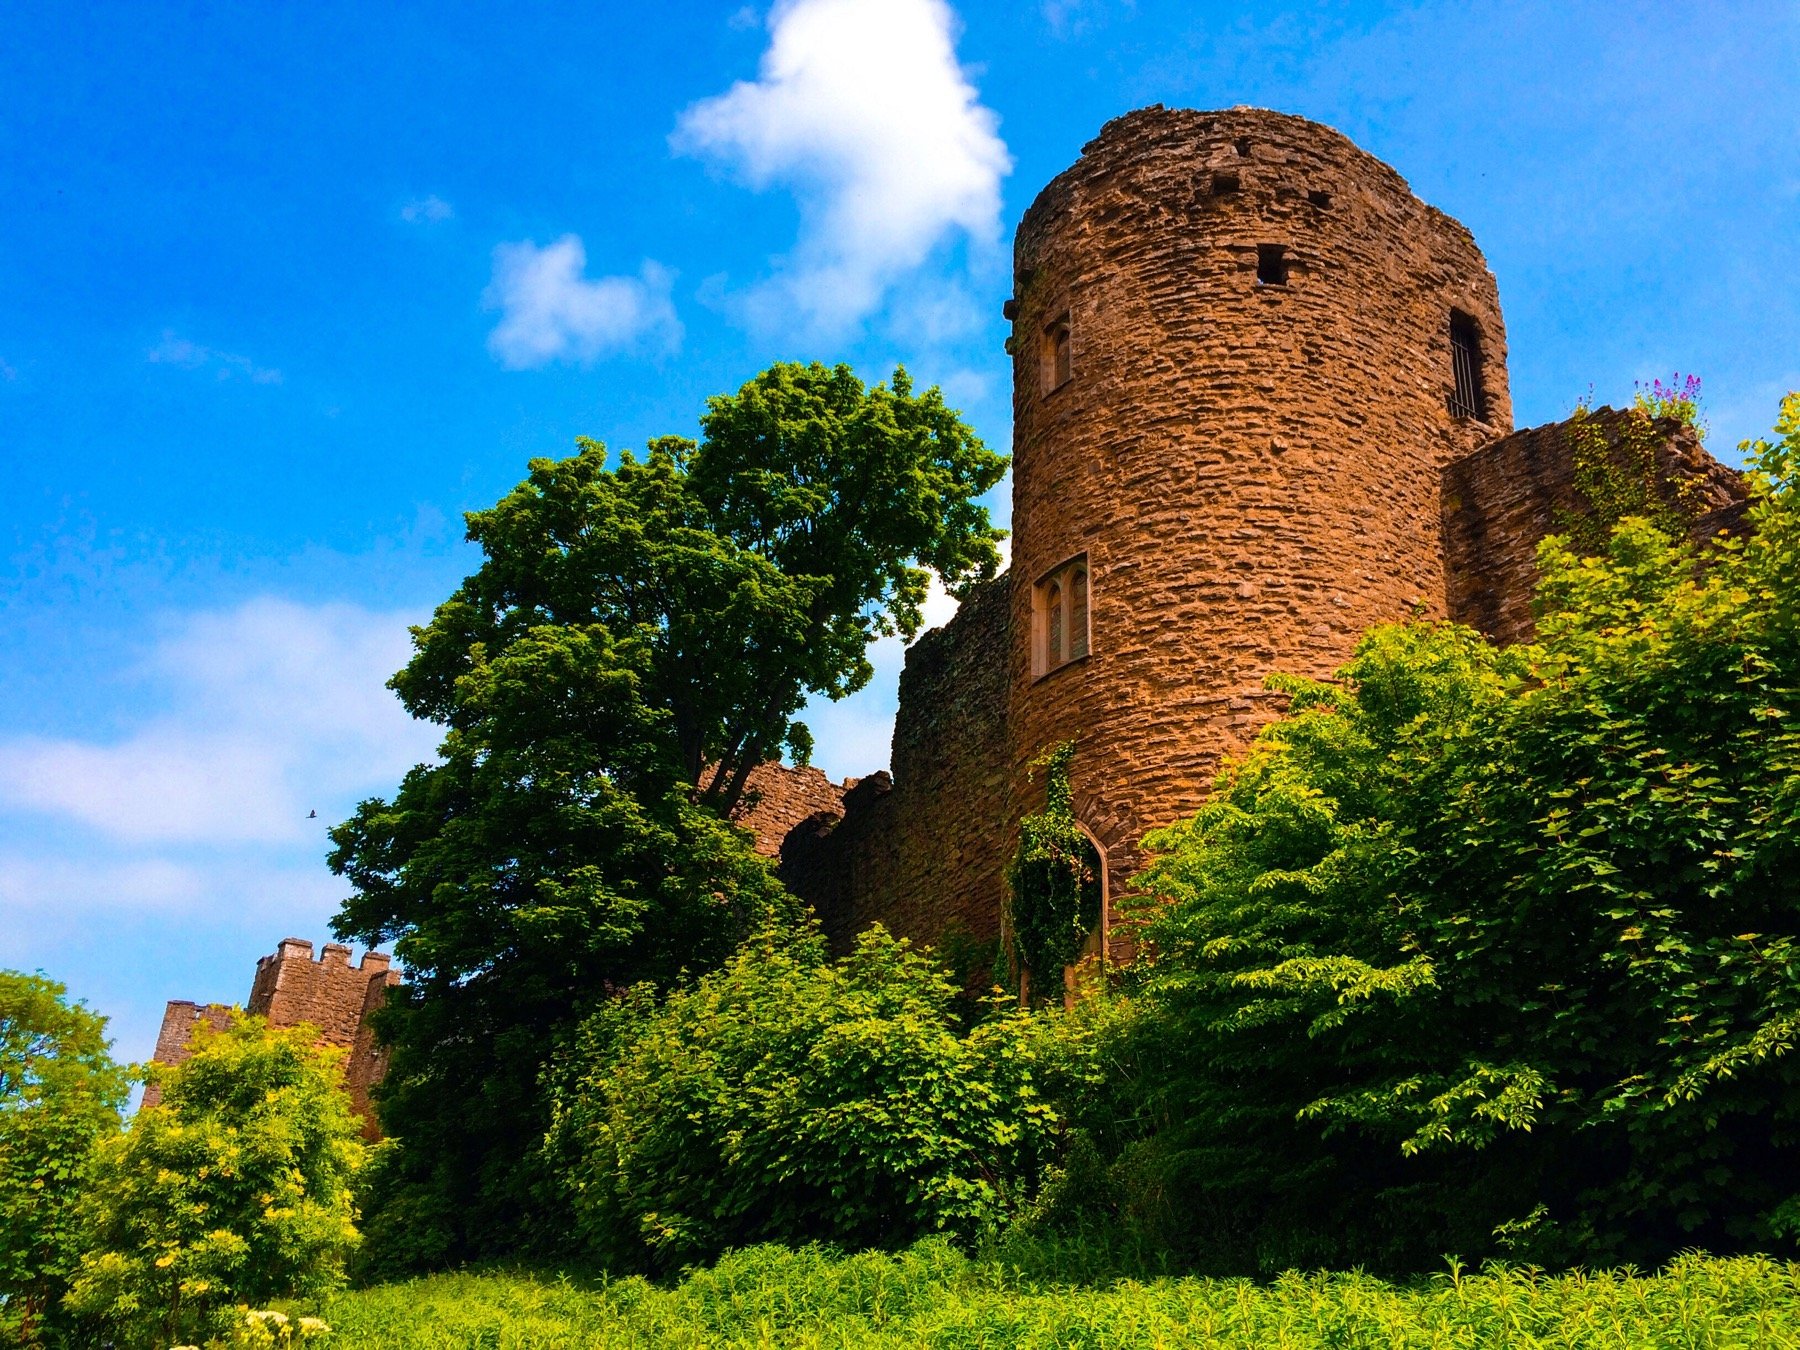 A tower at Ludlow Castle